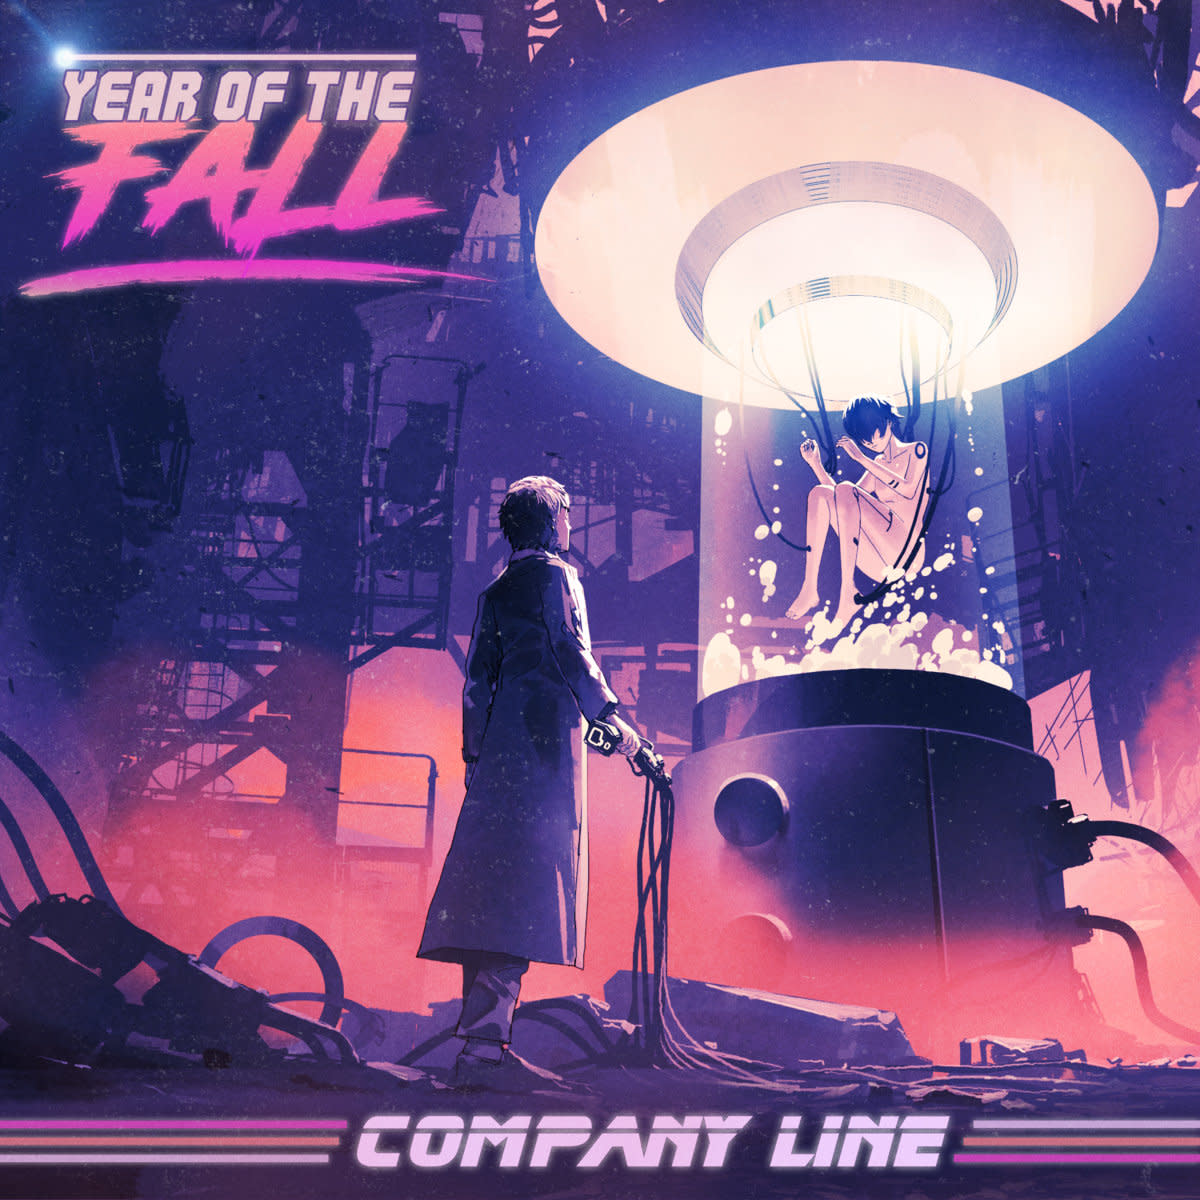 synth-single-review-company-line-by-year-of-the-fall